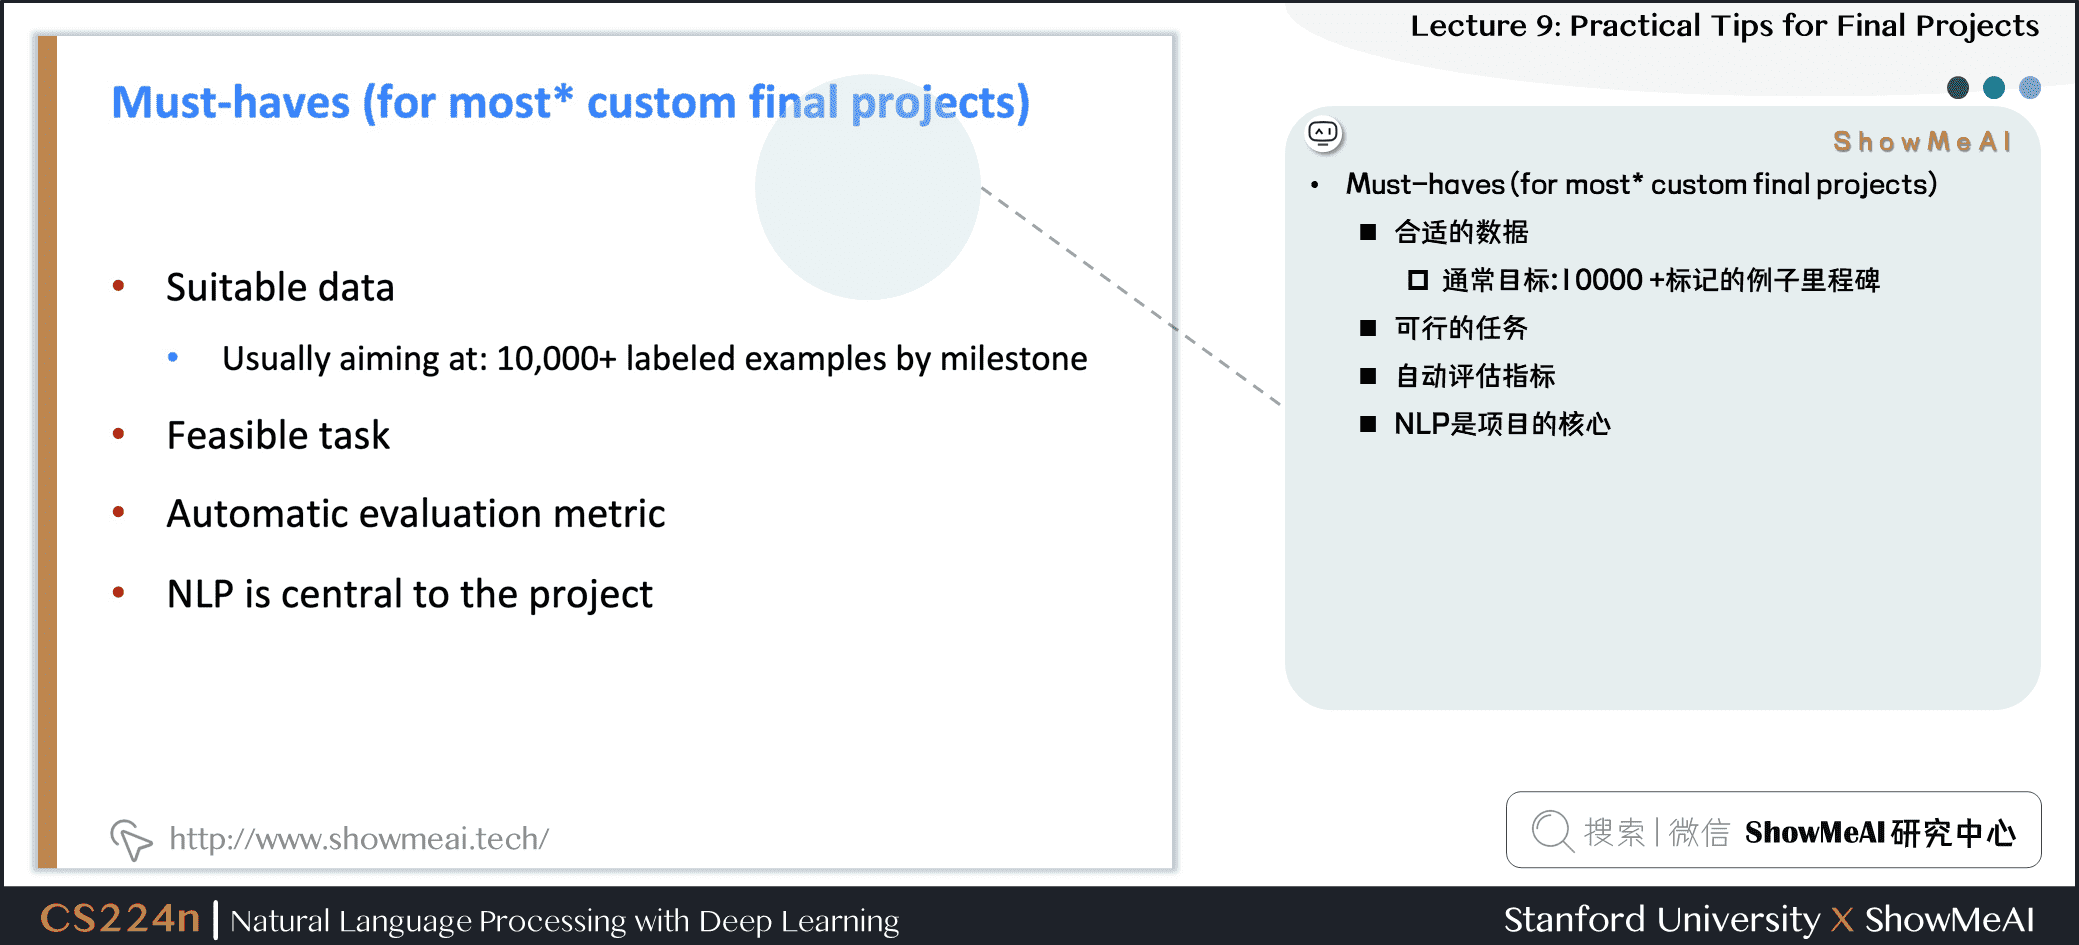 Must-haves (for most* custom final projects)